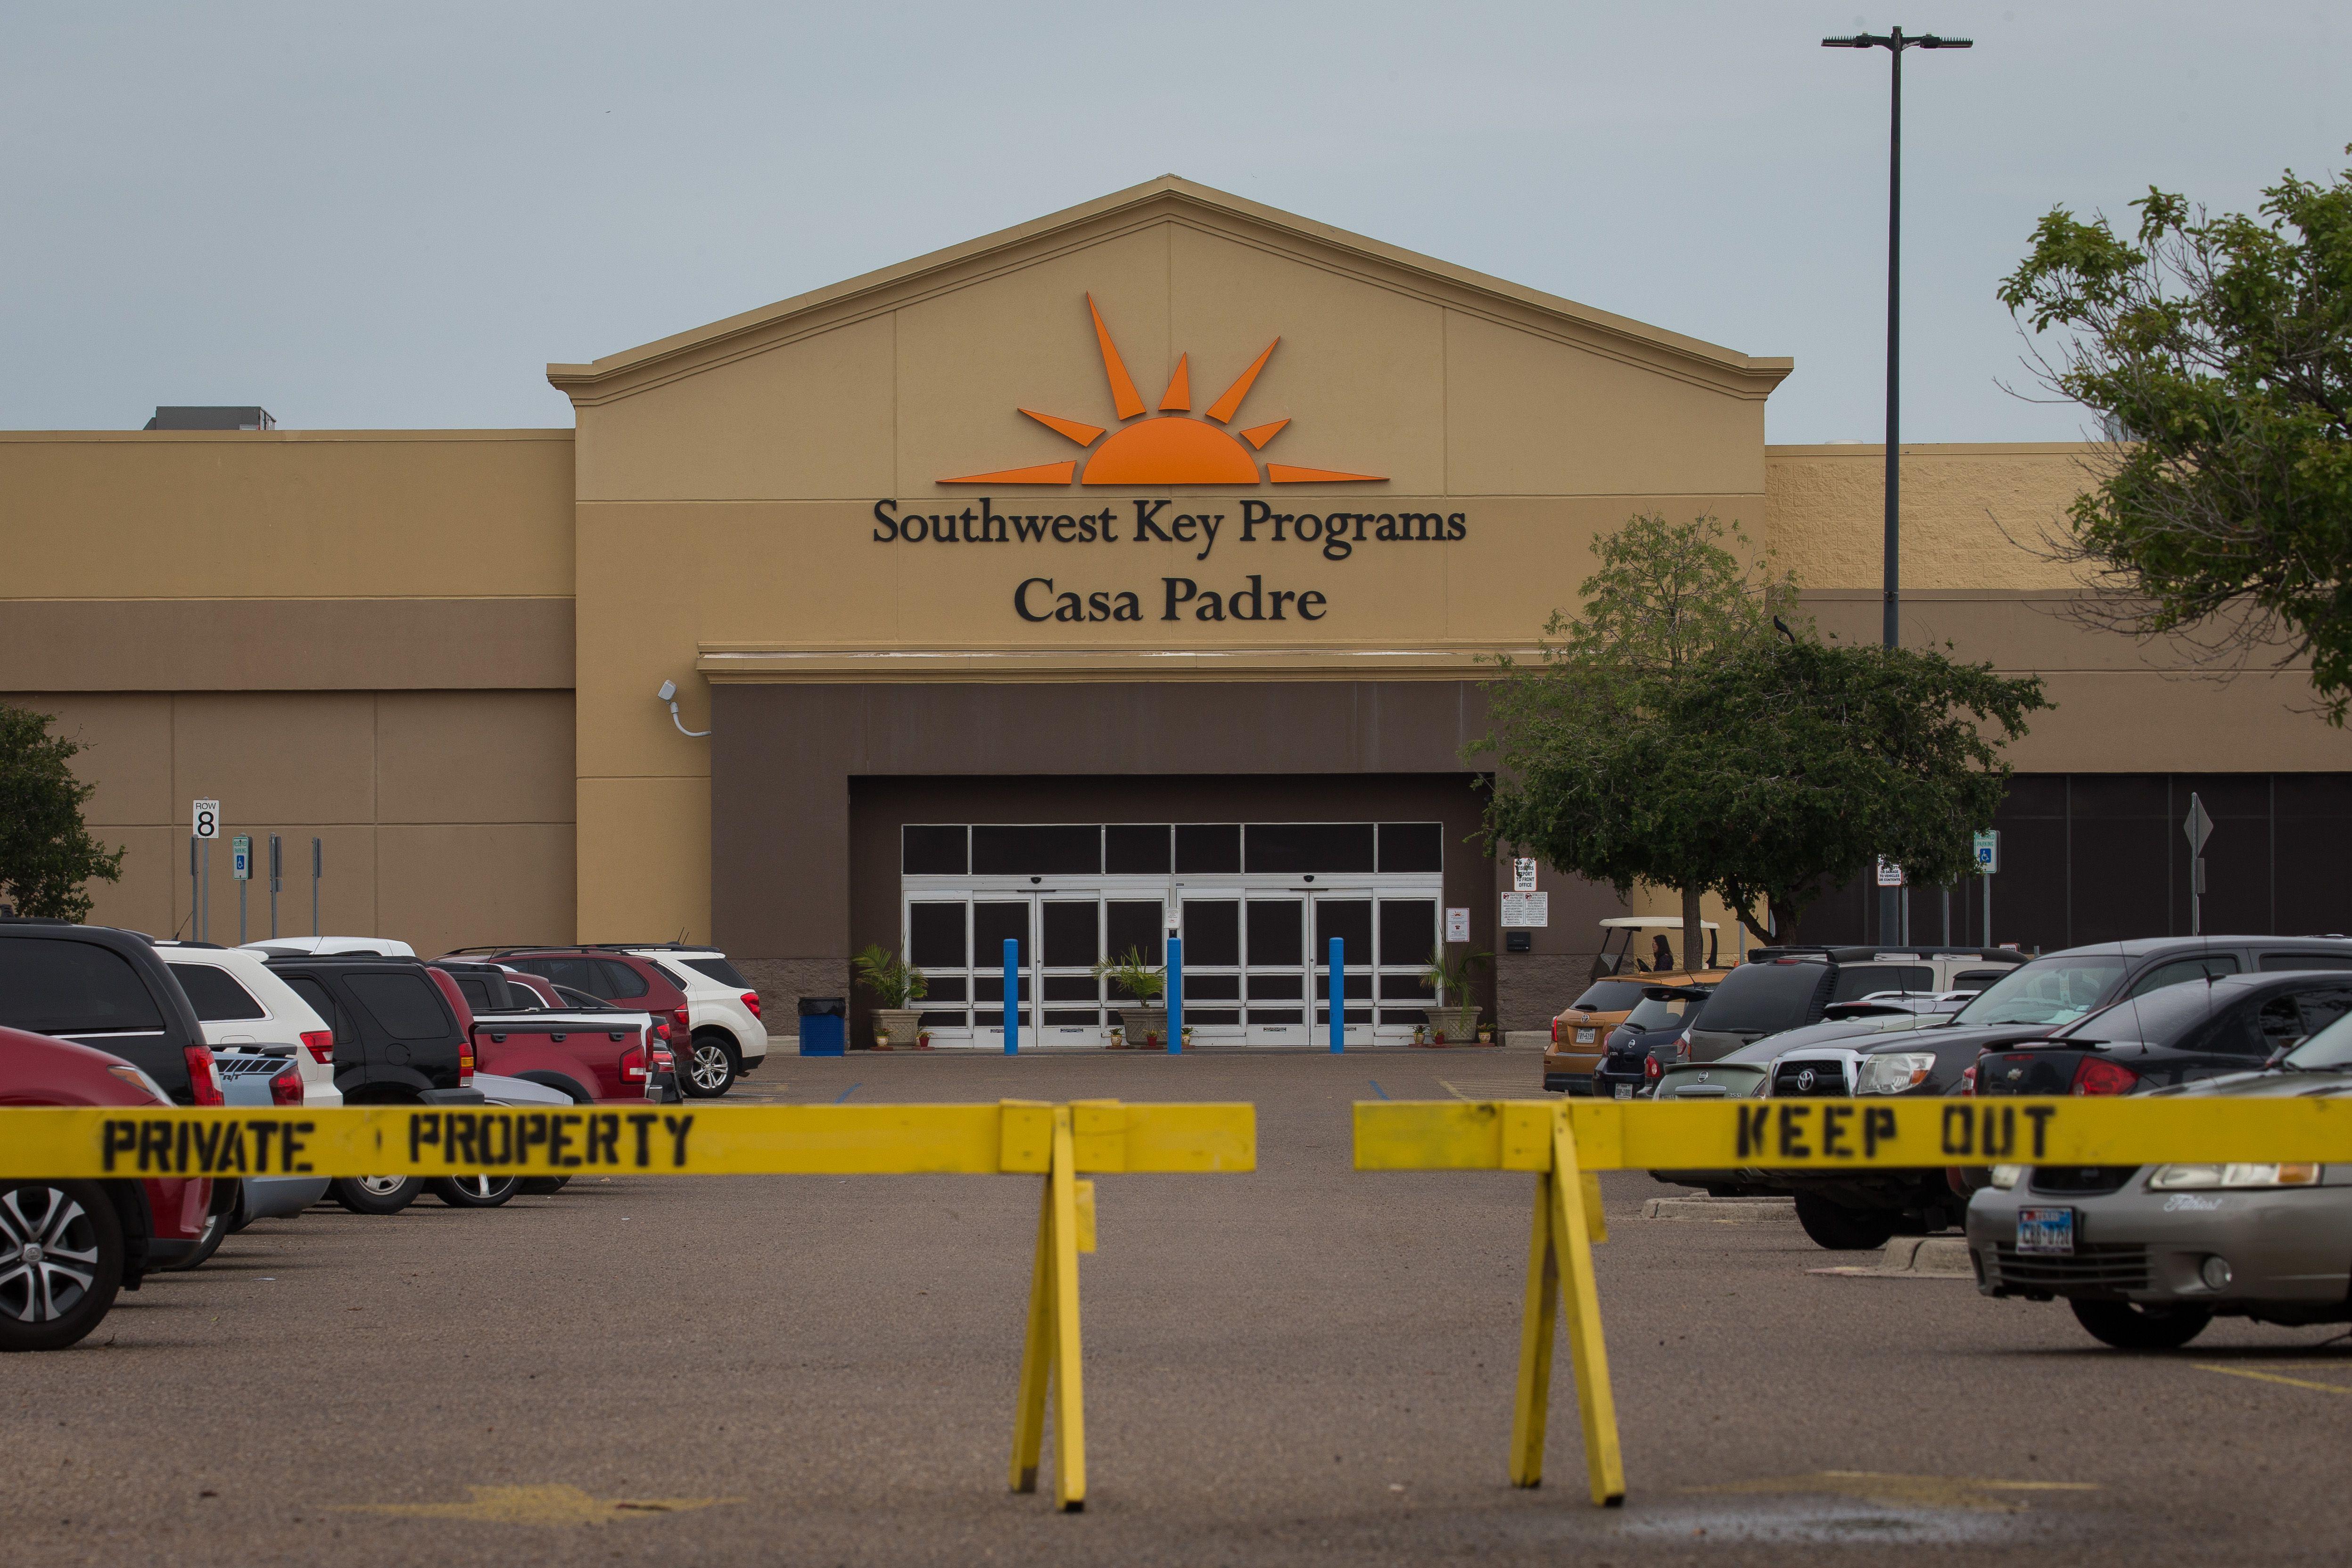 A former Walmart Supercenter under the name Southwest Key Programs, Casa Padre, now being used a migrant children's center.